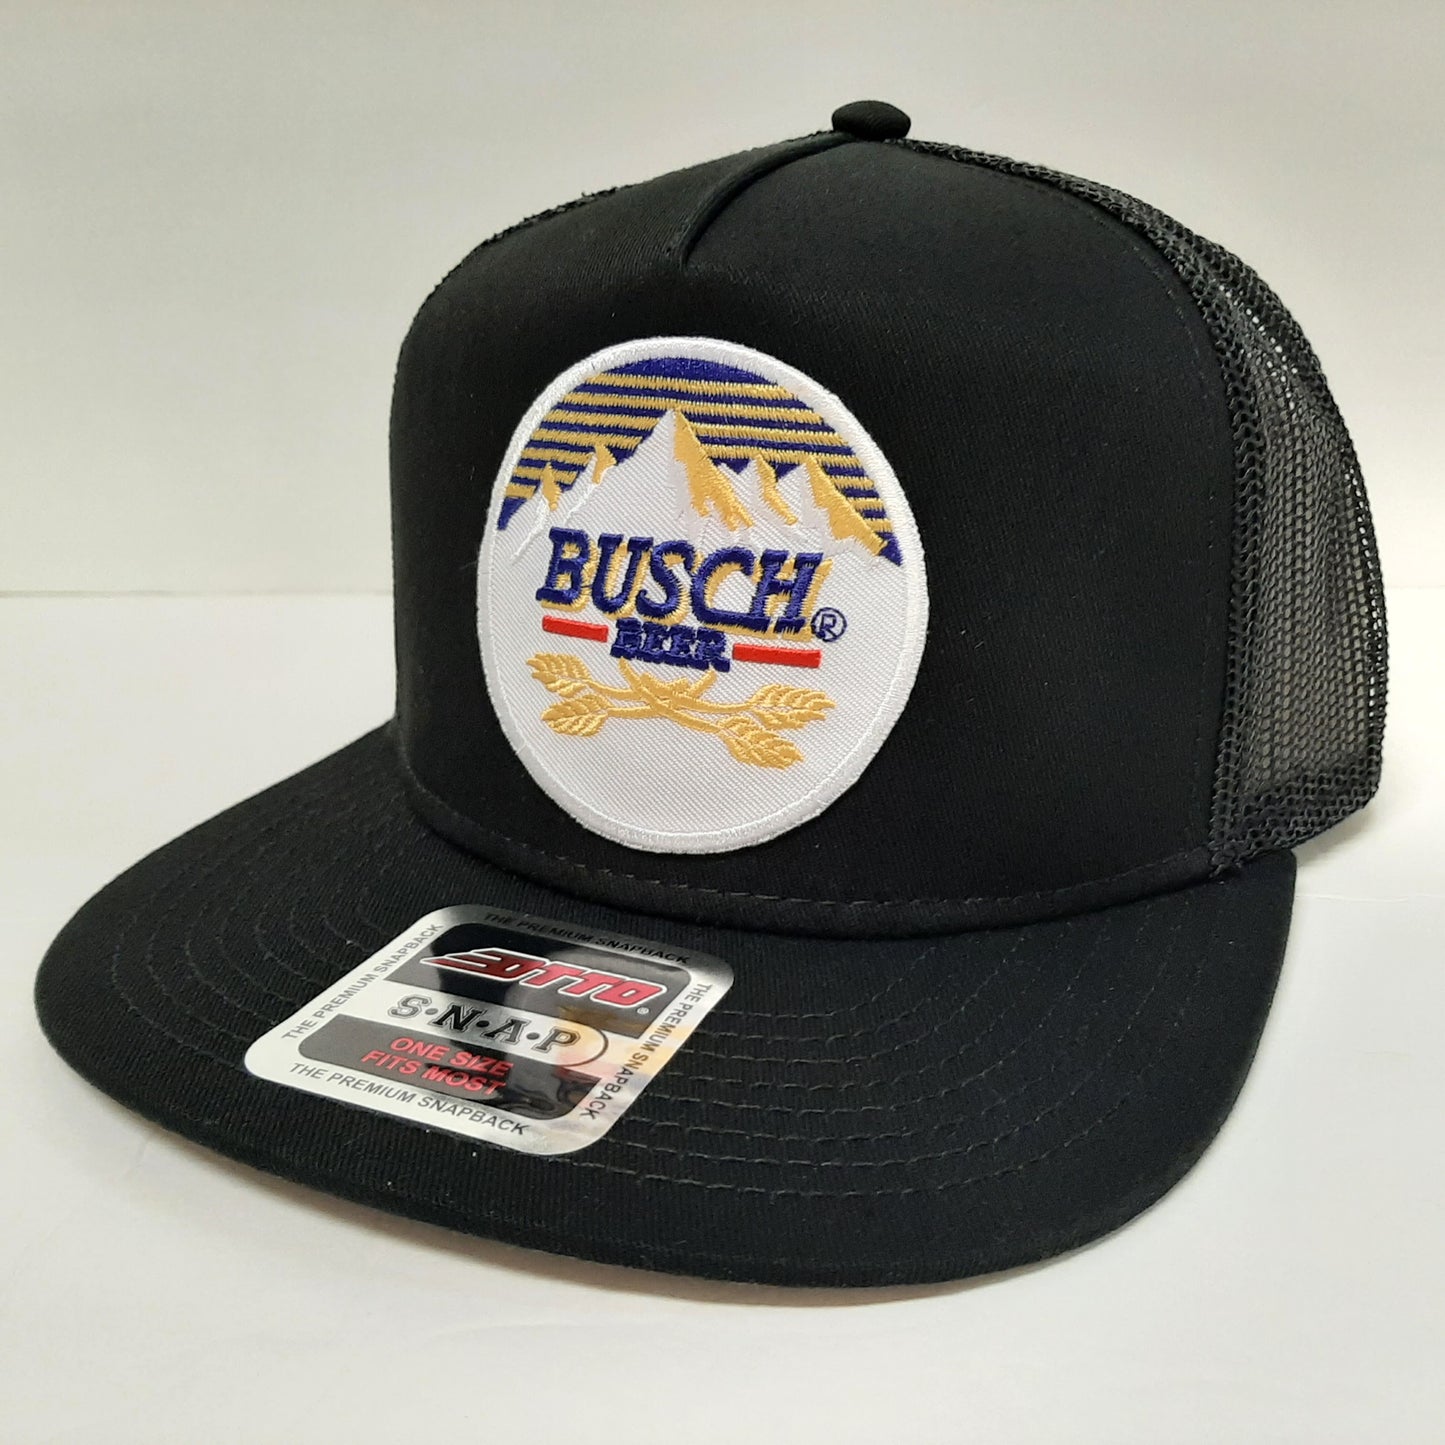 Busch Beer Embroidered Patch Flat Bill Snapback Mesh Hat Cap OTTO